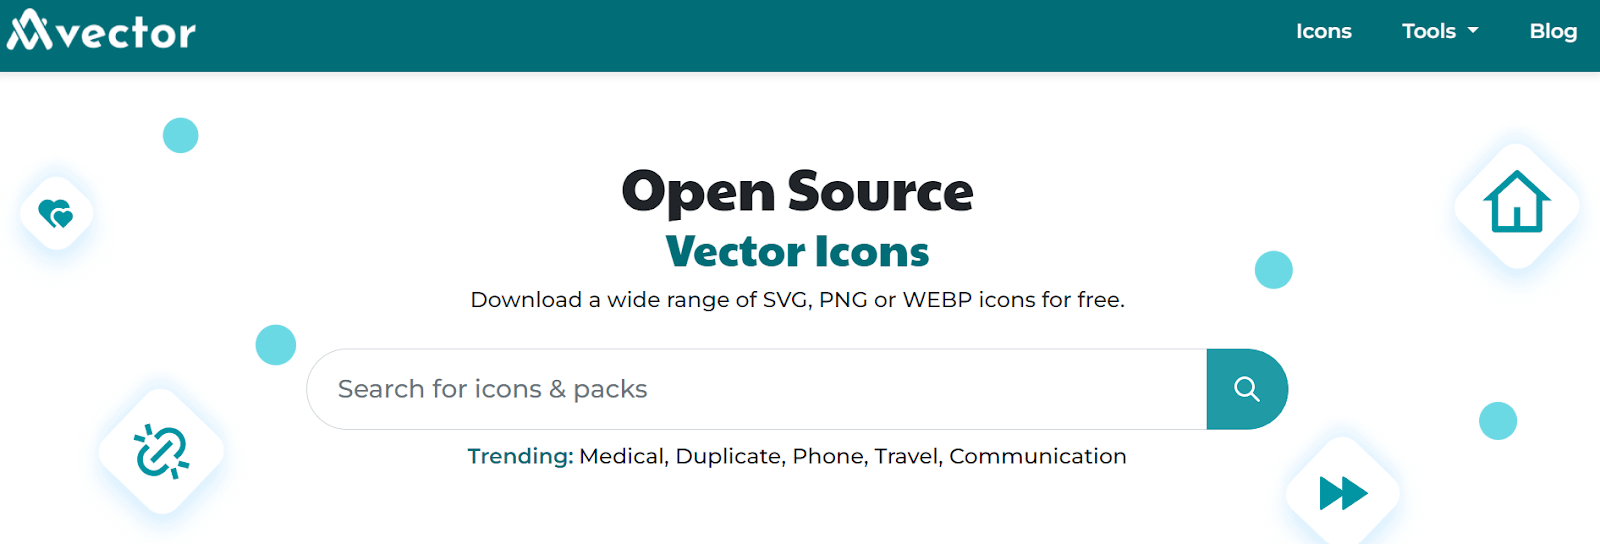 Free Vector Icons and Images